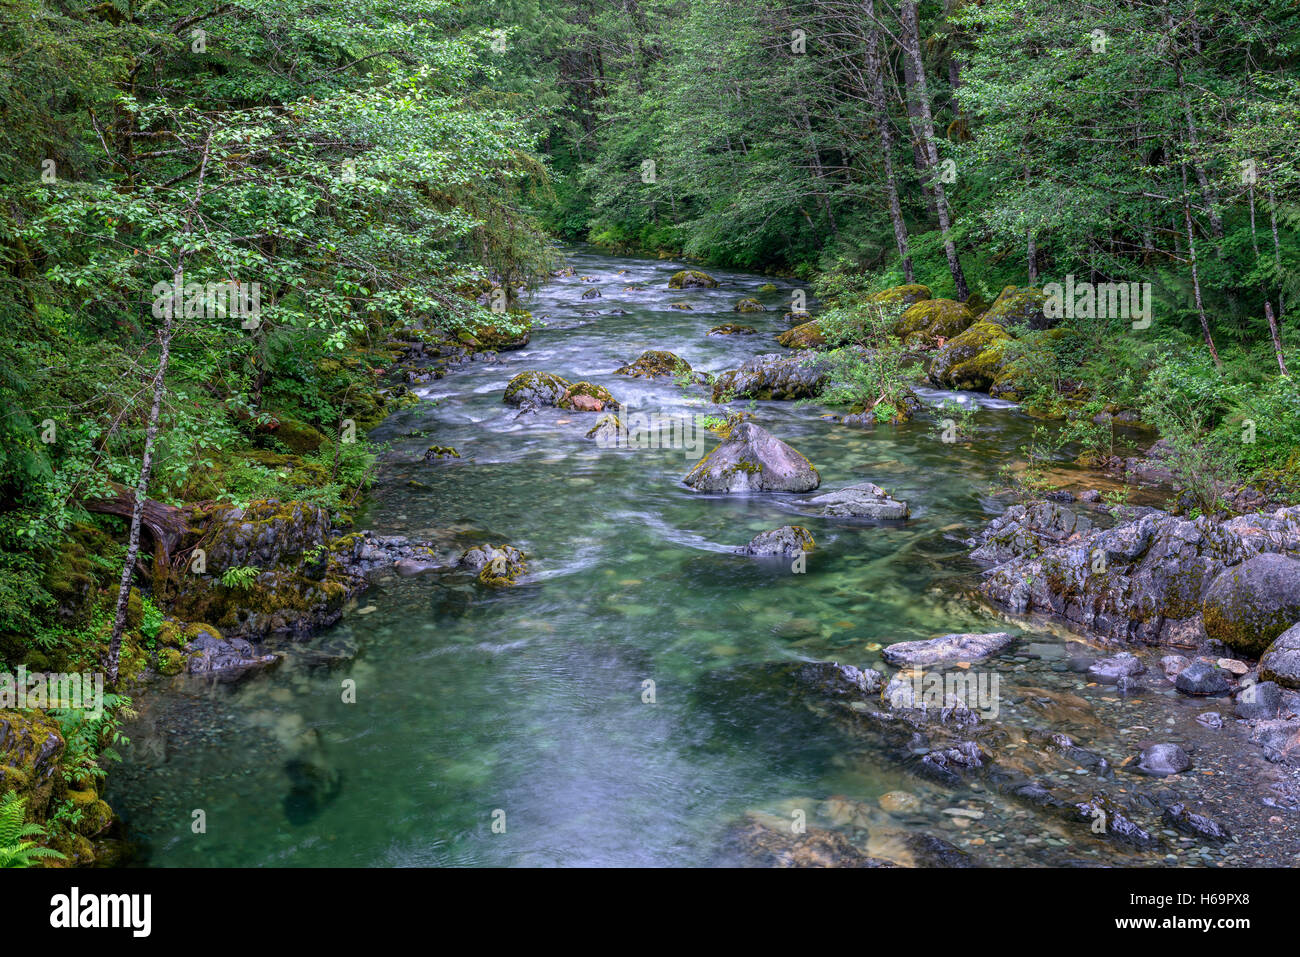 USA, Oregon, Willamette National Forest, Opal Creek Scenic Recreation Area, Little North Santiam River and lush forest in spring Stock Photo